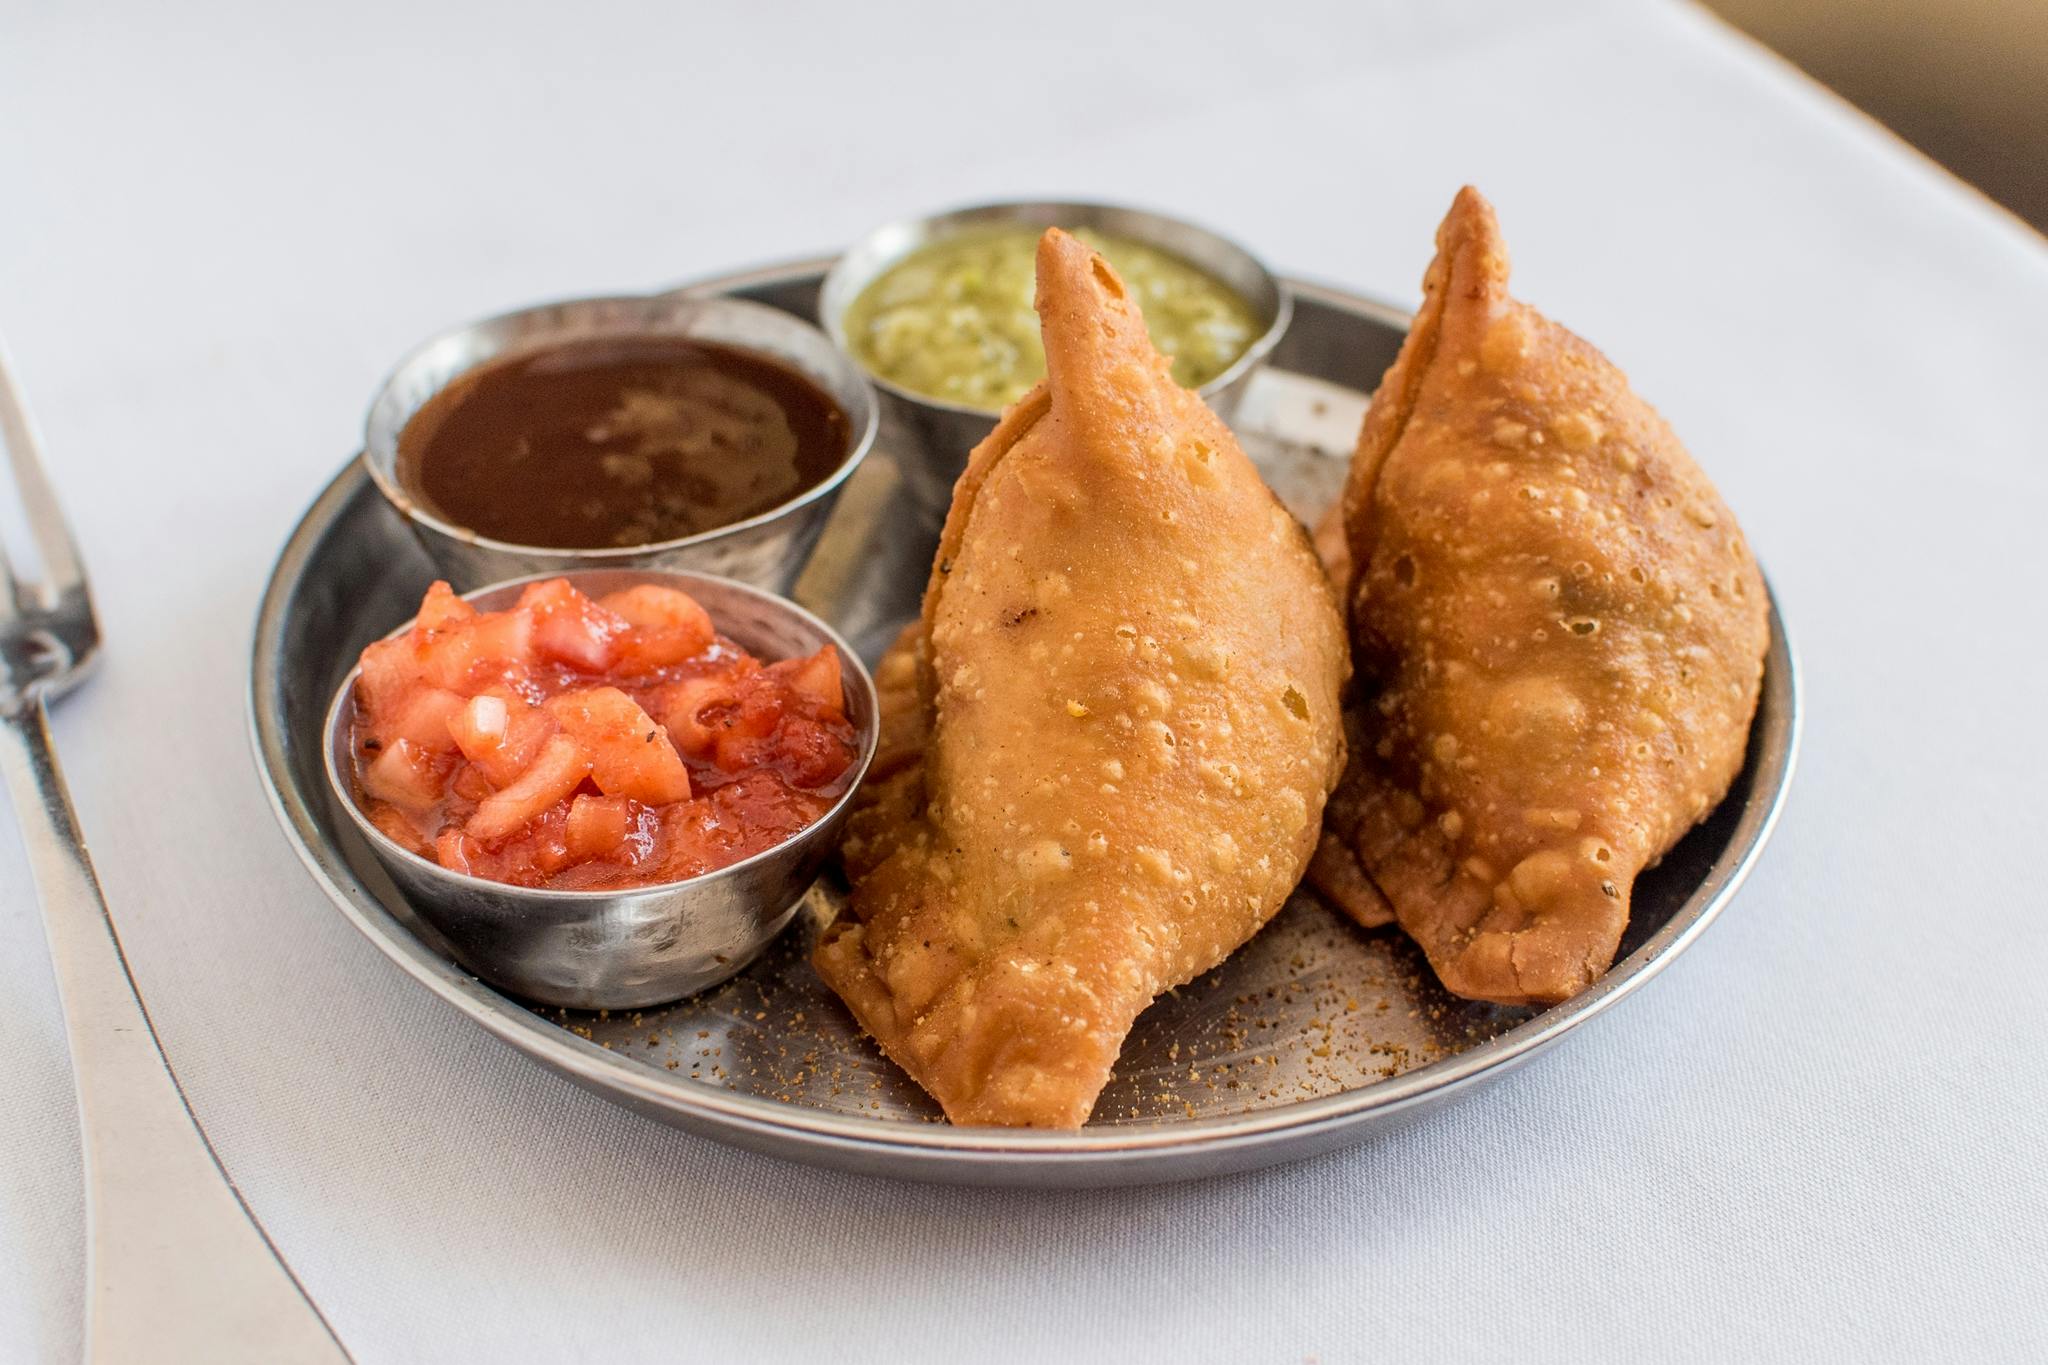 Lamb Samosa (2) from Dhaba Indian Bistro in Middleton, WI